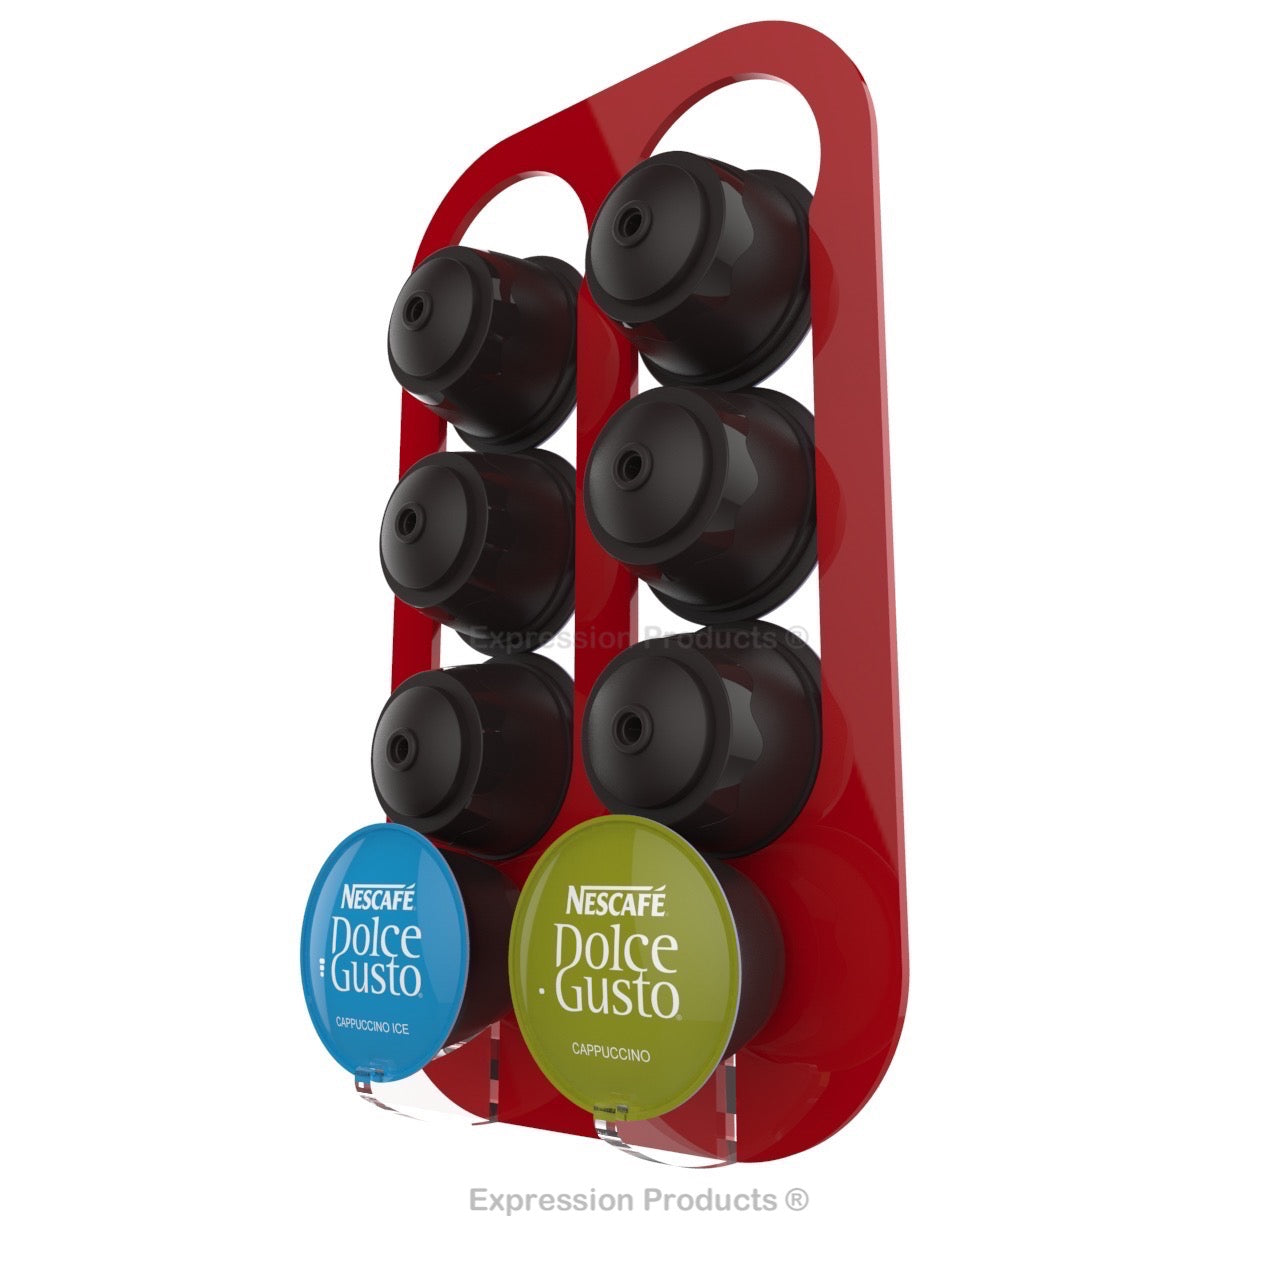 Dolce gusto coffee pod holder, wall mounted, half height.  Shown in red holding 8 pods